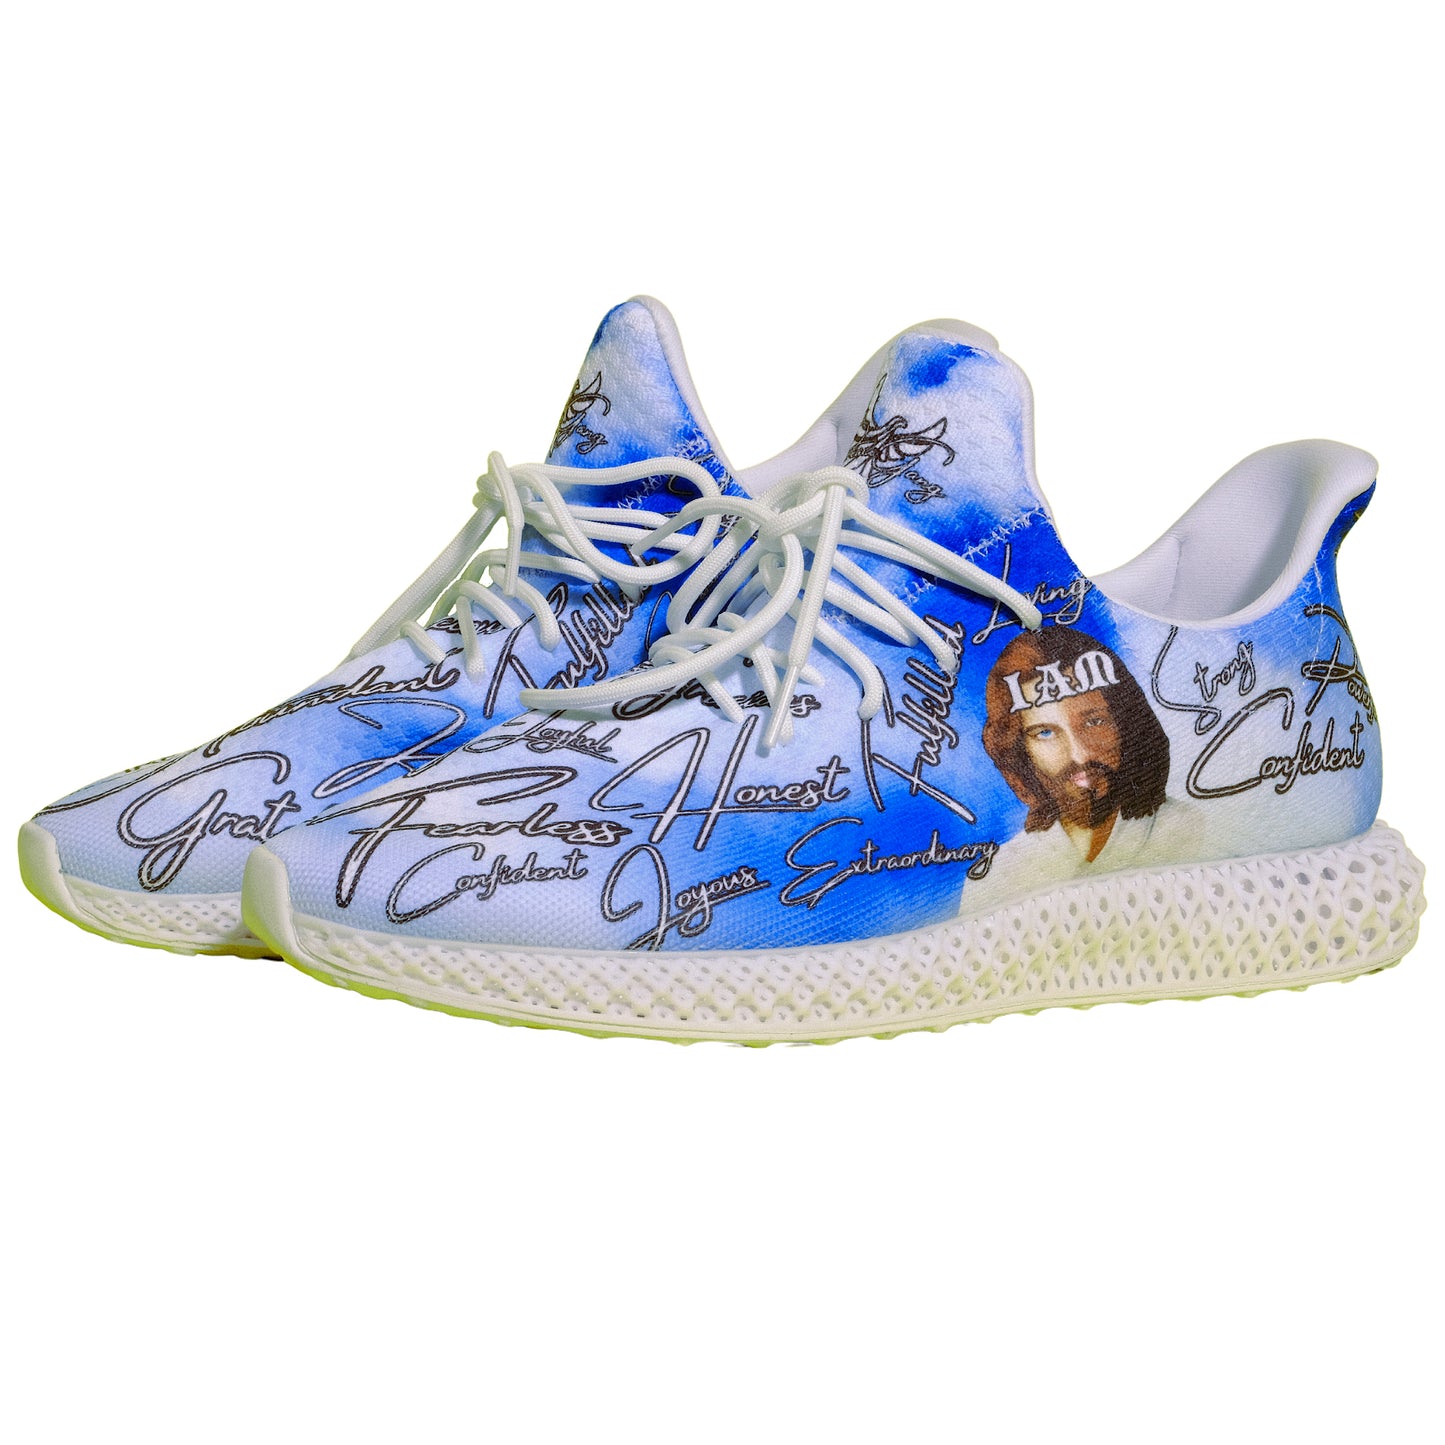 Jesus Christ Concept "IAM" Positive Mantra Mid Top Sneakers - PEACE GANG